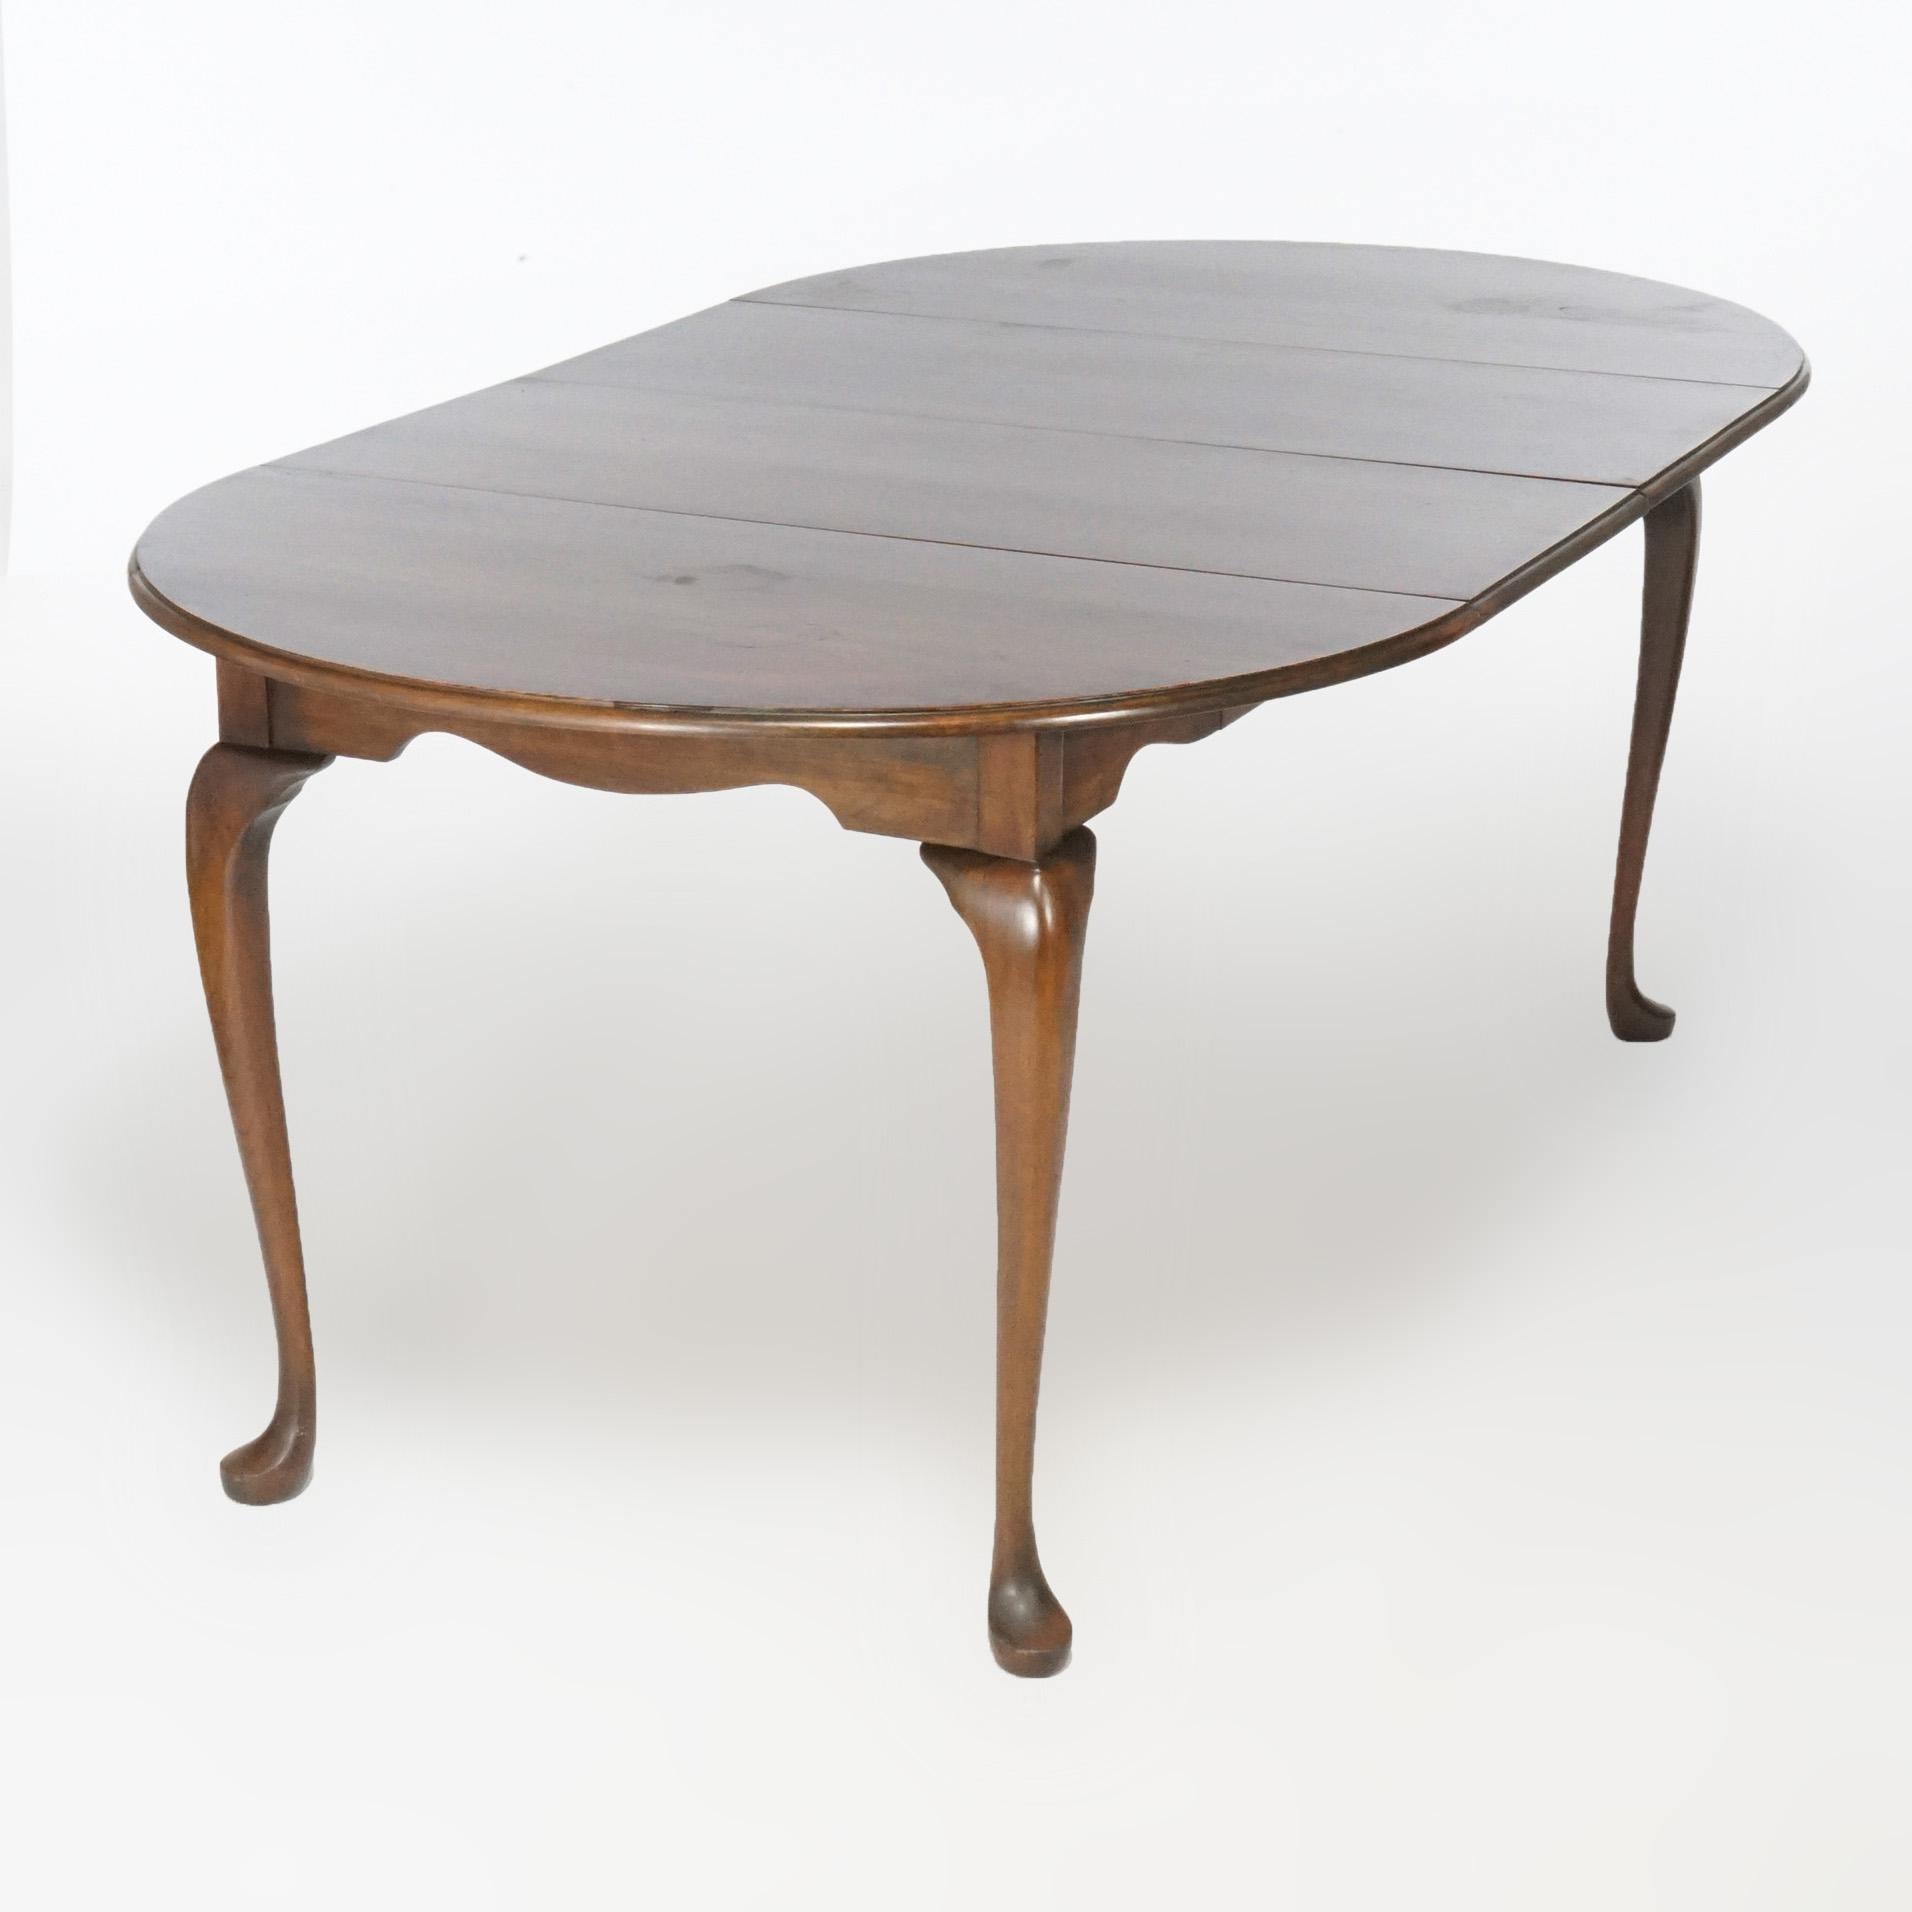 A Queen Anne style breakfast dining table offers cherry construction with circular top extending to accept two leaves and raised on cabriole legs terminating in pad feet, 20th century

Measures- 30''H x 41.75''W x 41.75''D; with single leaf 58'';